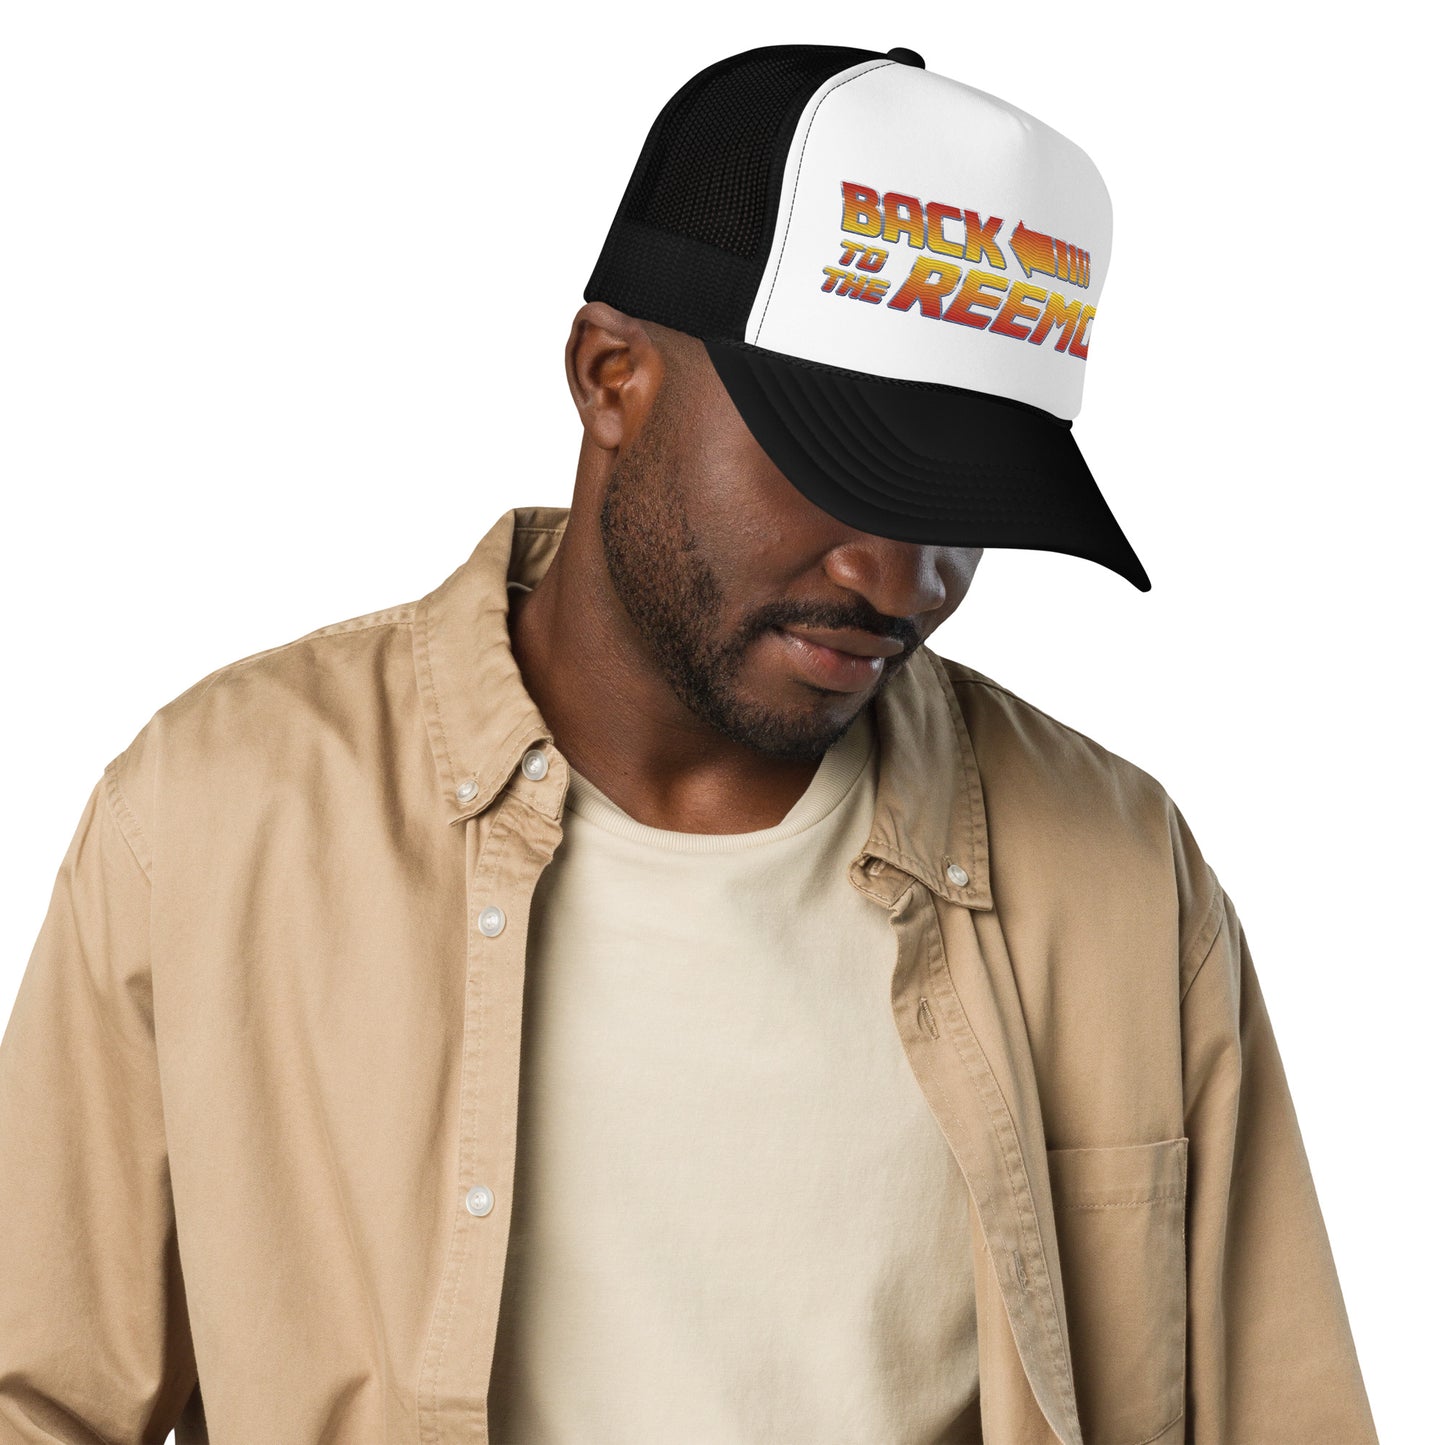 "Back To The Reemo" trucker hat